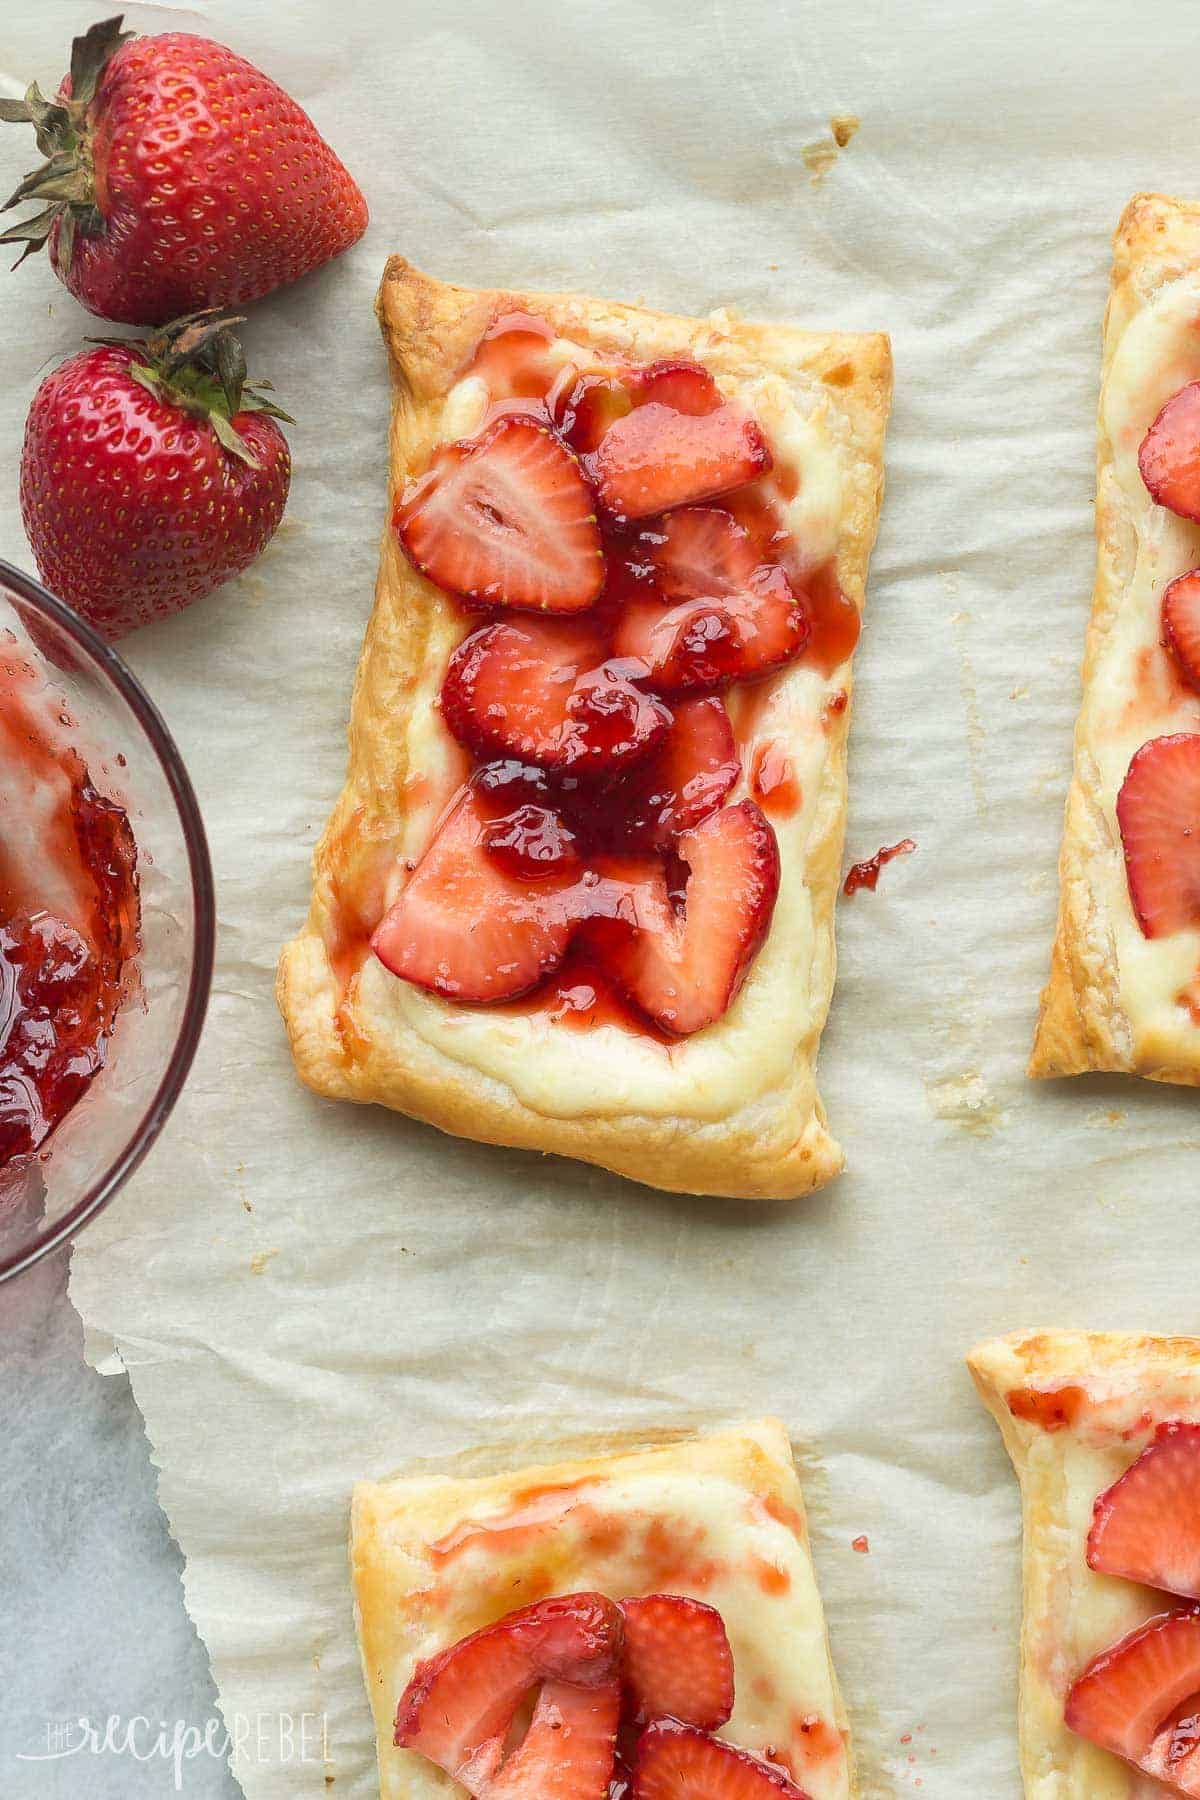 This Easy Strawberry Cream Cheese Danish uses puff pastry and fresh strawberries, making it the ultimate quick summer dessert! Use whatever fruit you like! Includes step by step recipe video. | strawberry recipes | fresh strawberries | summer dessert | easy dessert | puff pastry | puff pastry danish